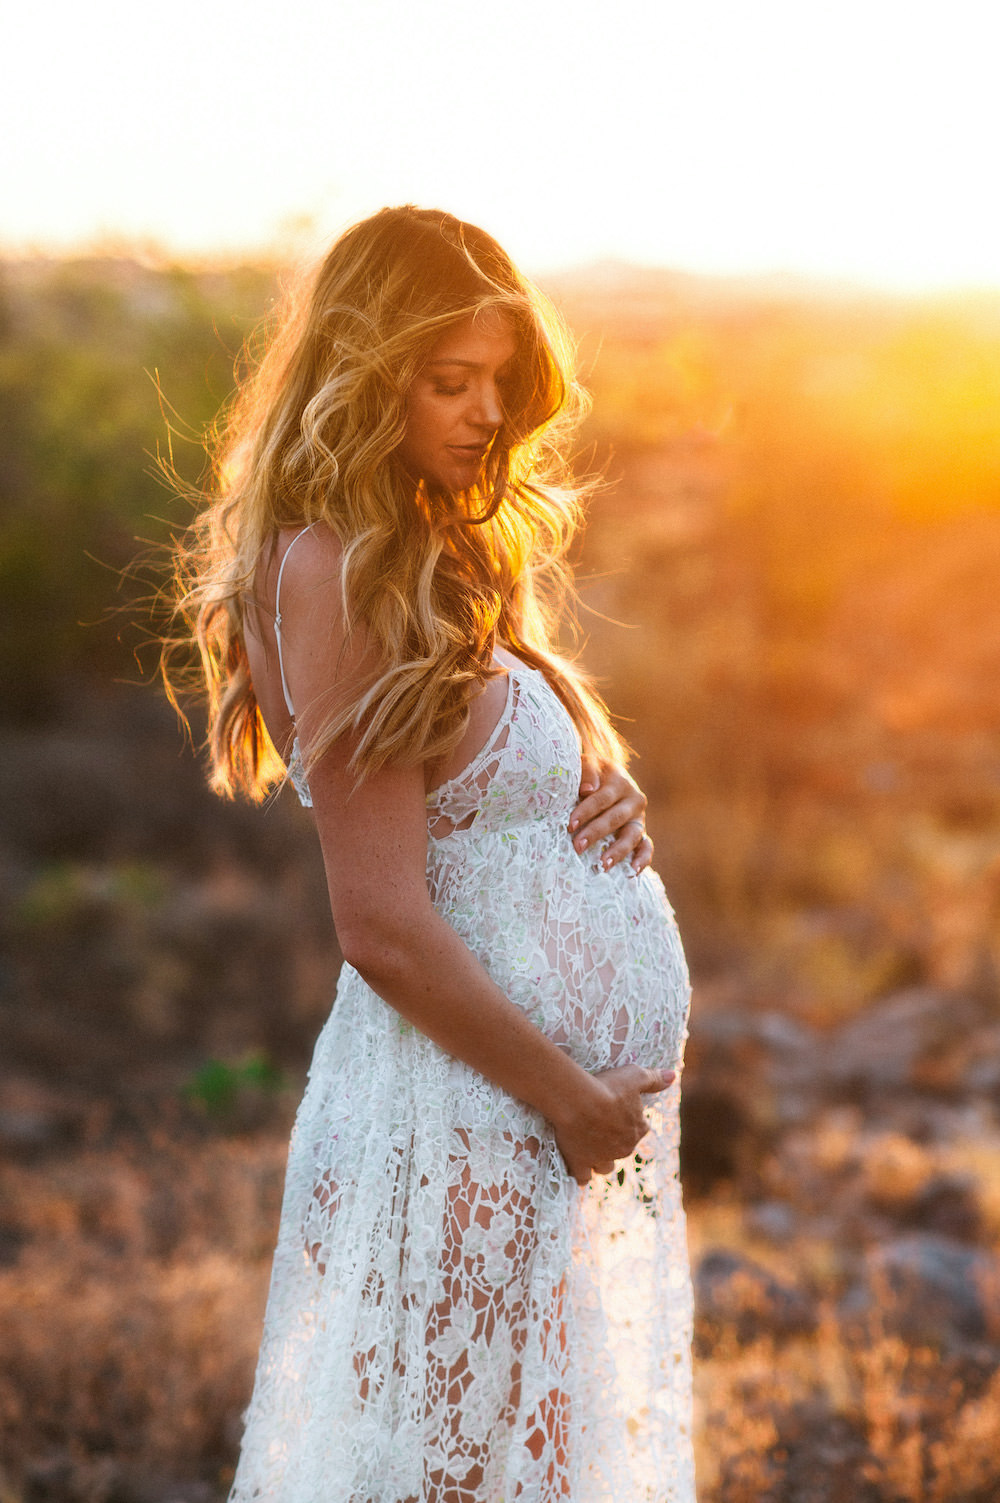 Dash of Darling | Maternity Photo Shoot with Brianna Anderson